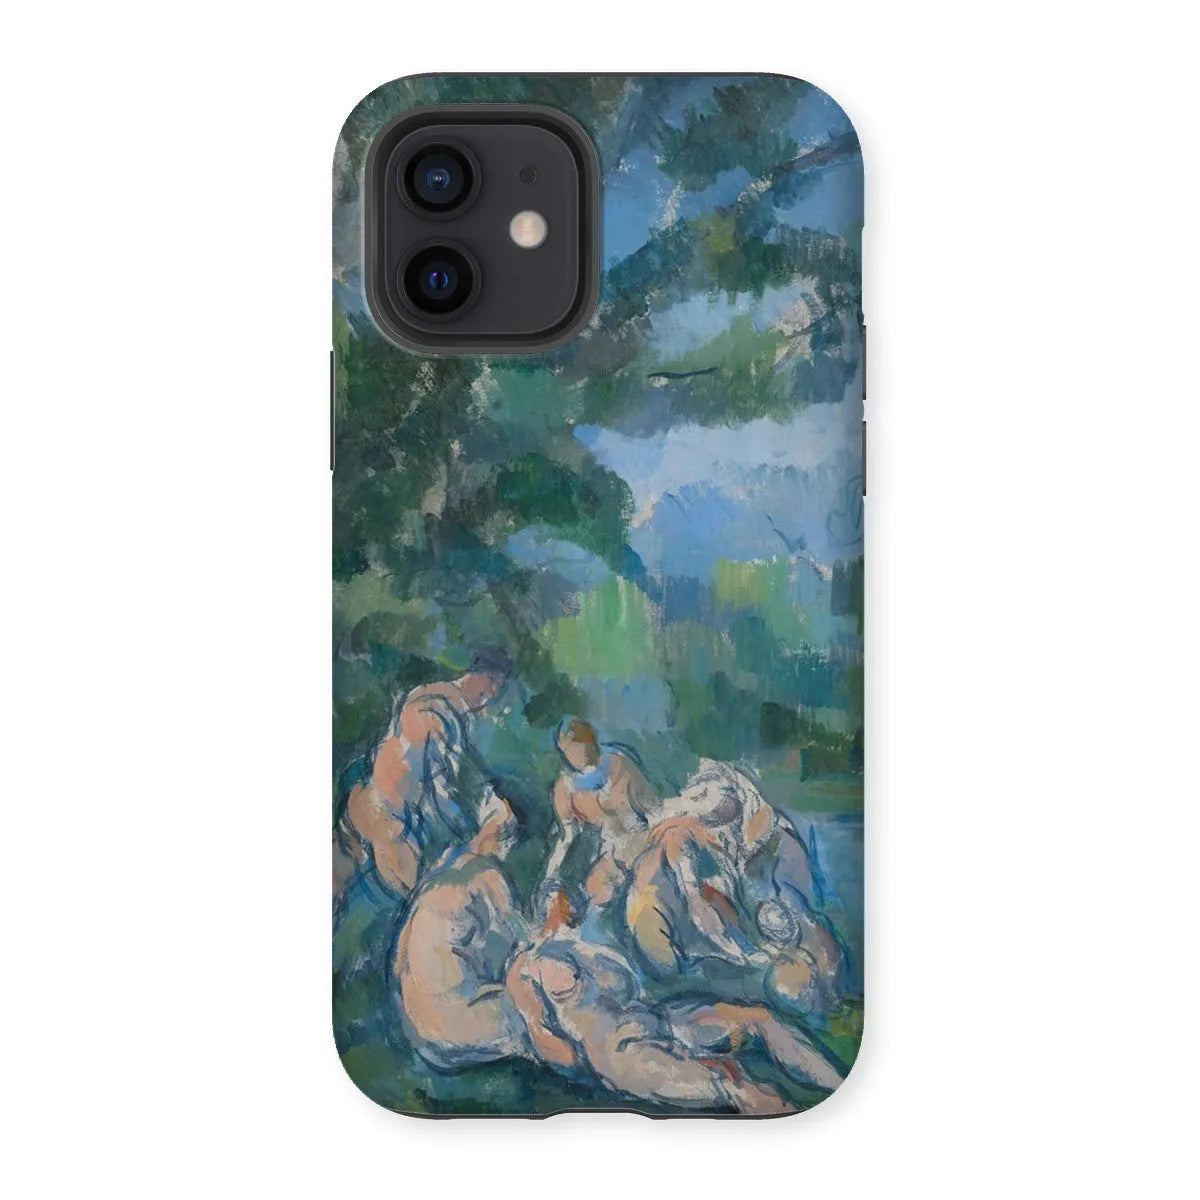 The Bathers - Post-impressionism Phone Case - Paul Cezanne - Iphone 12 / Matte - Mobile Phone Cases - Aesthetic Art